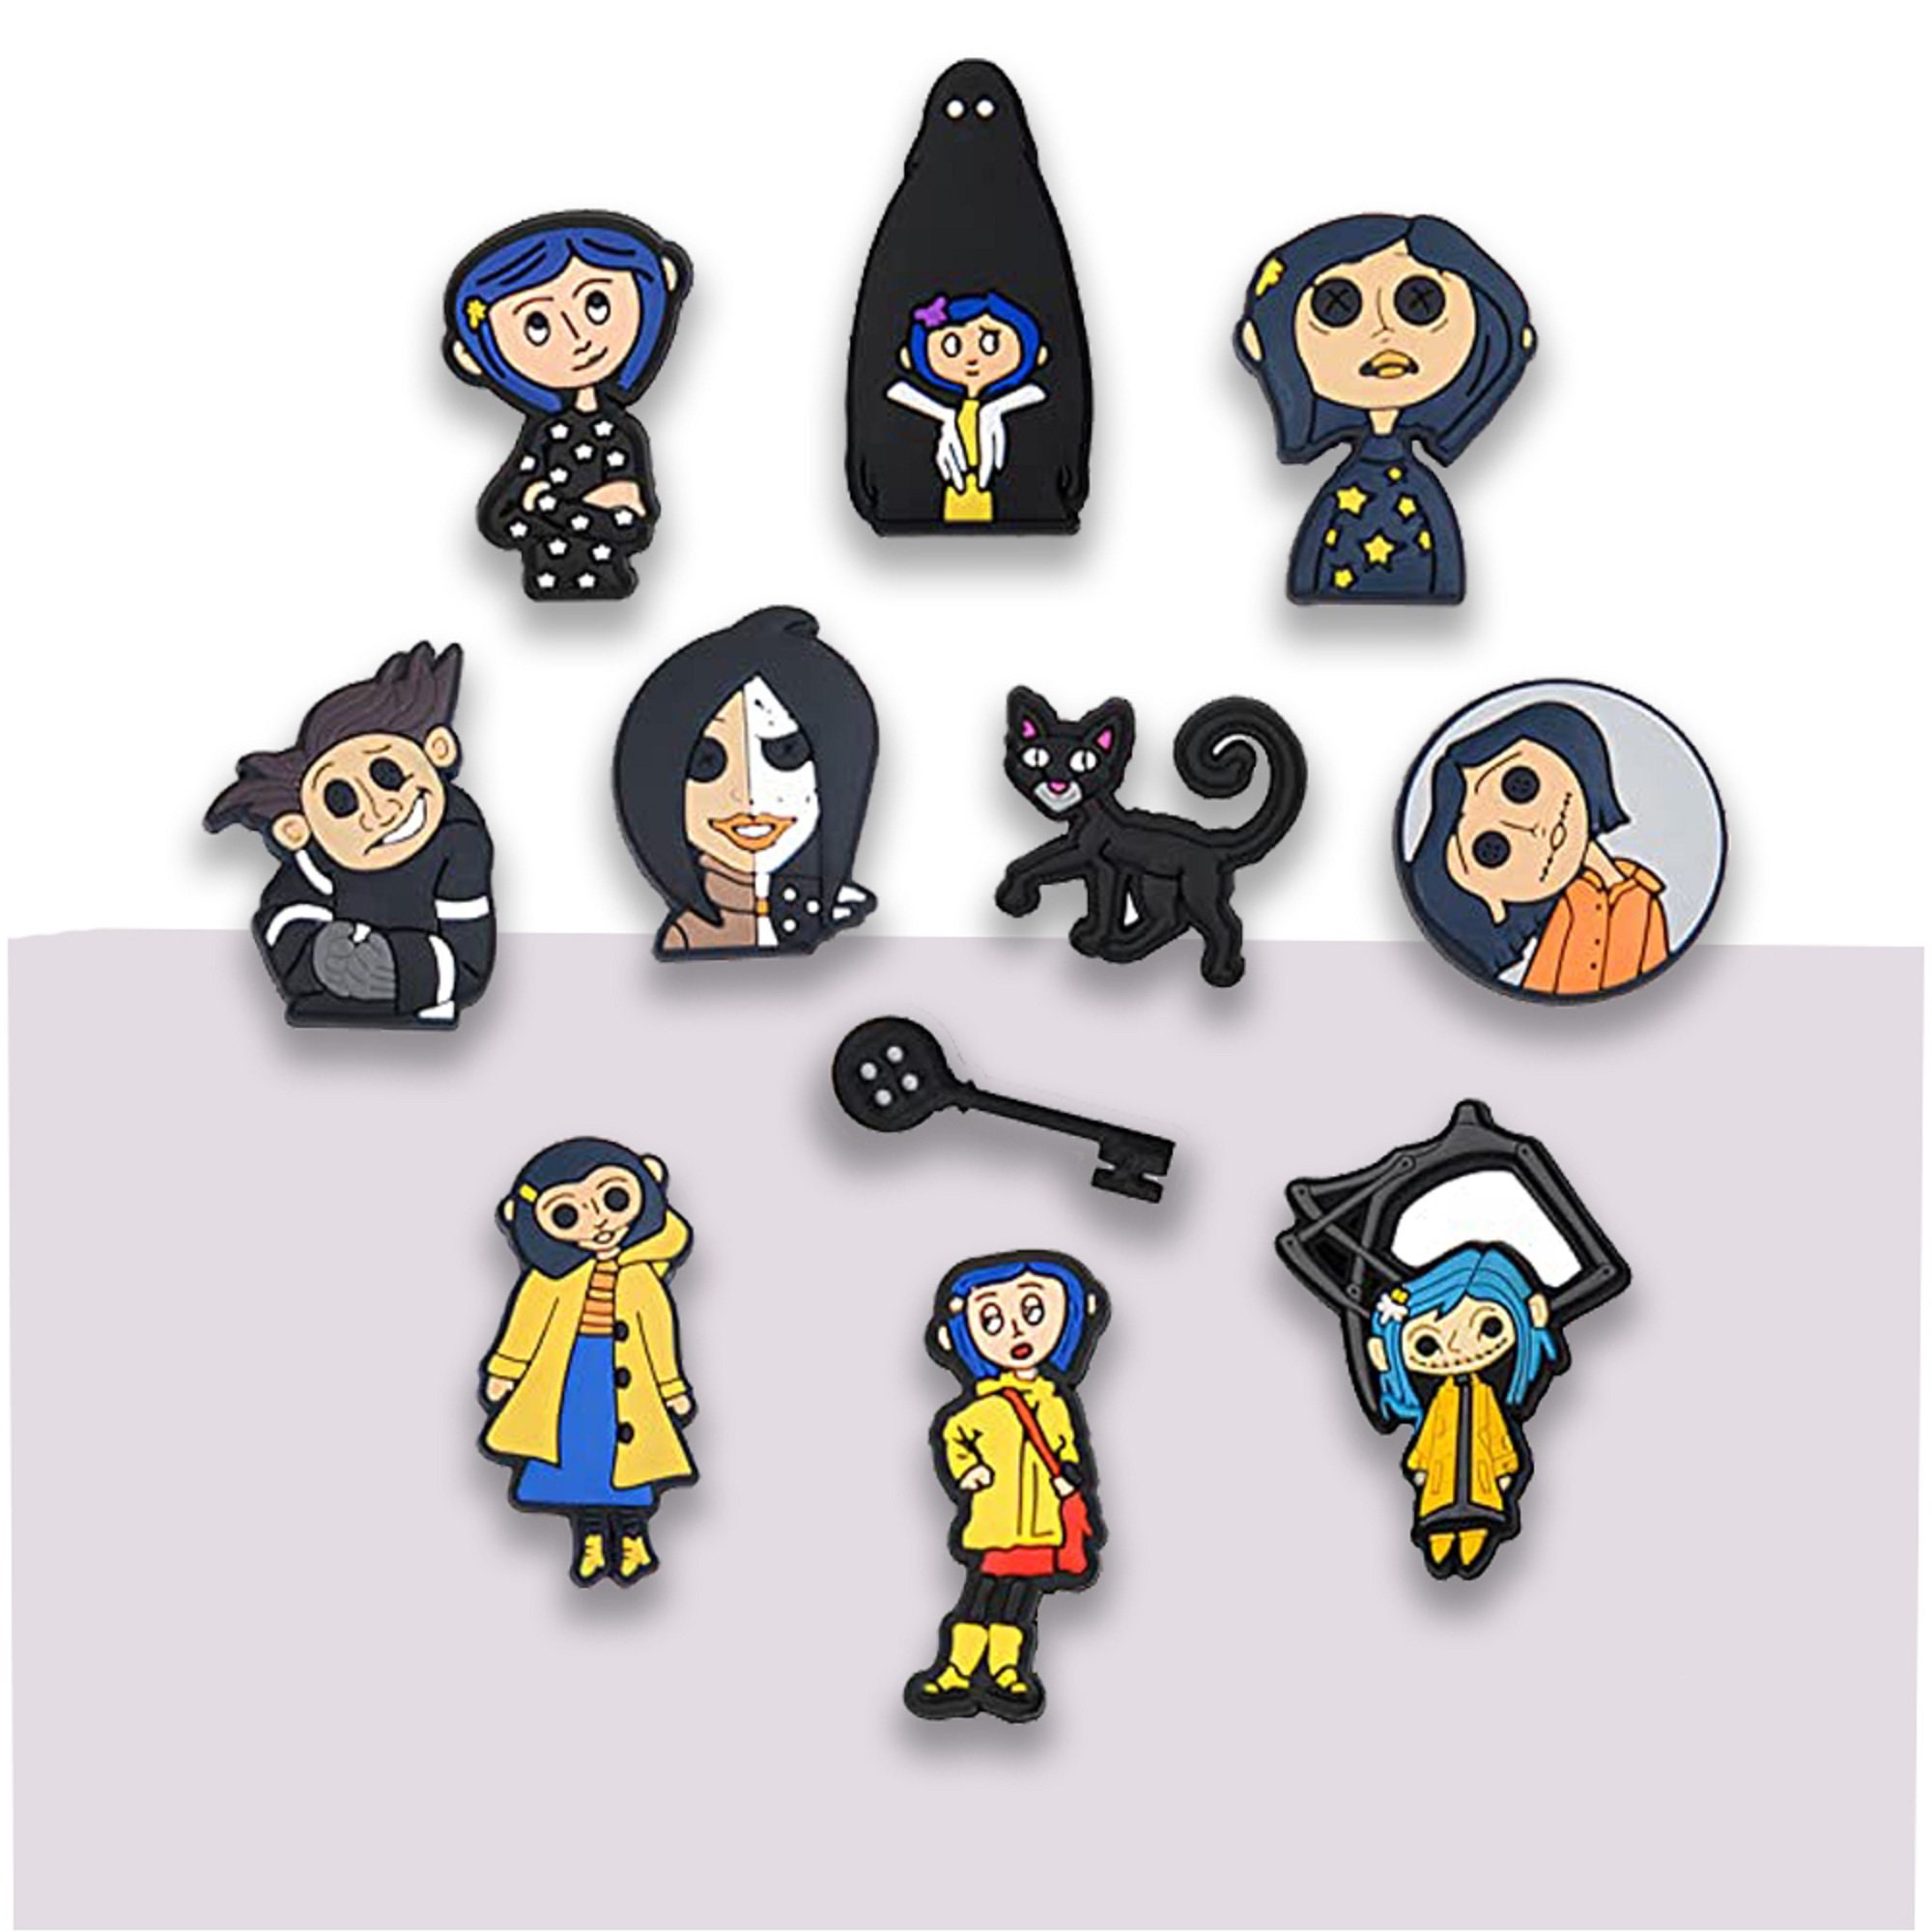 Full set Halloween Coraline girl in yellow rain coat 3pc set Jewellery Brooches Pins & Clips Clothing & Shoe Clips Shoe Clips 